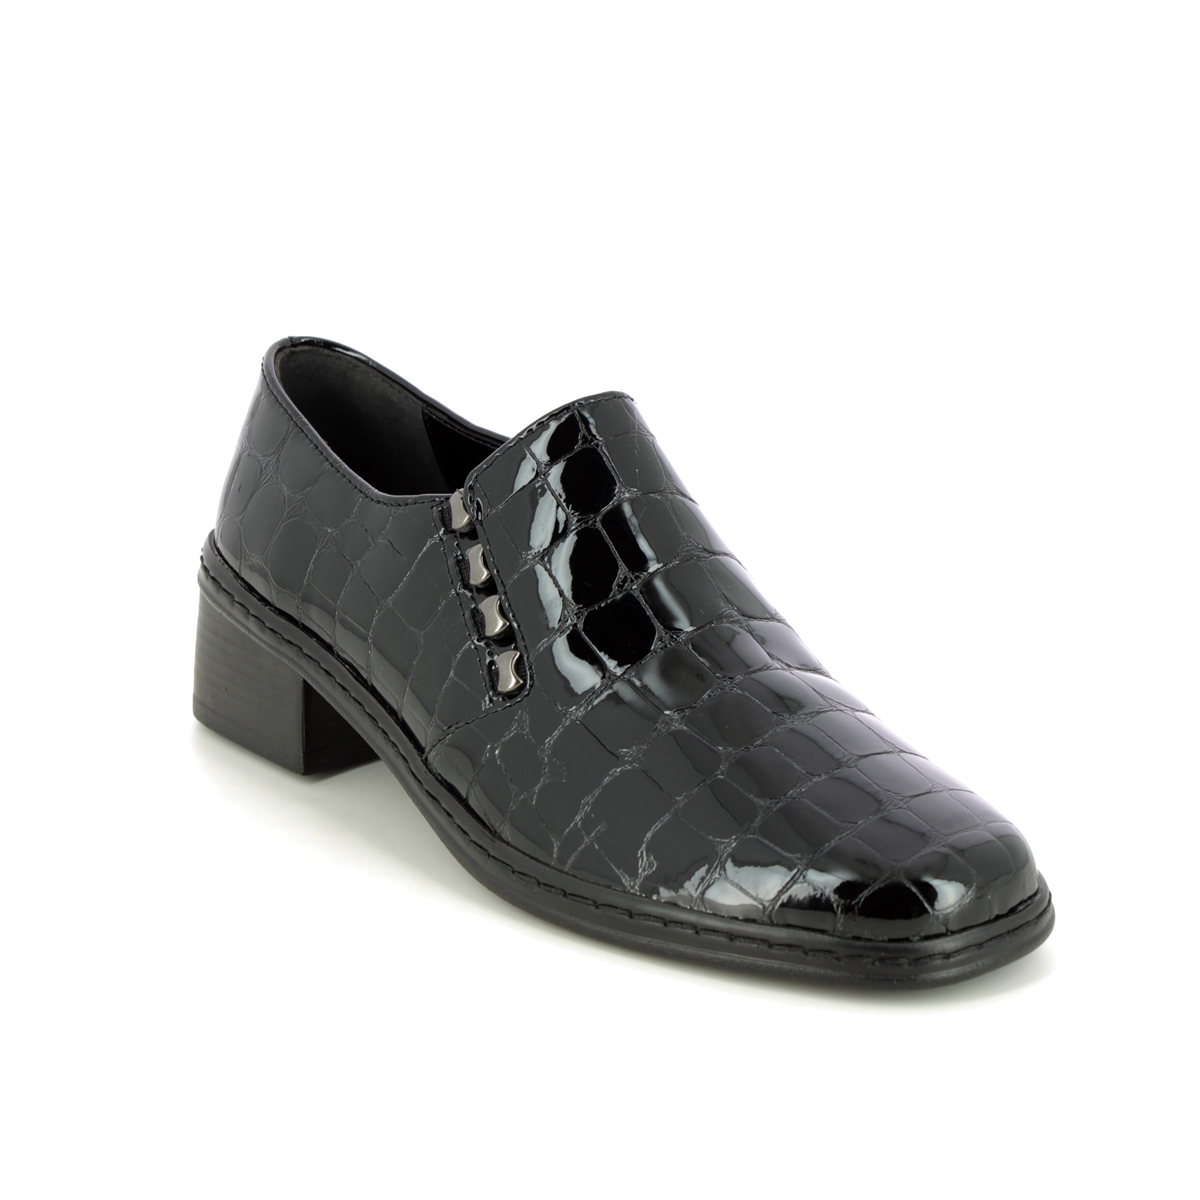 Gabor Hertha Dots Black croc Womens Comfort Slip On Shoes 04.443.97 in a Plain Leather in Size 6.5